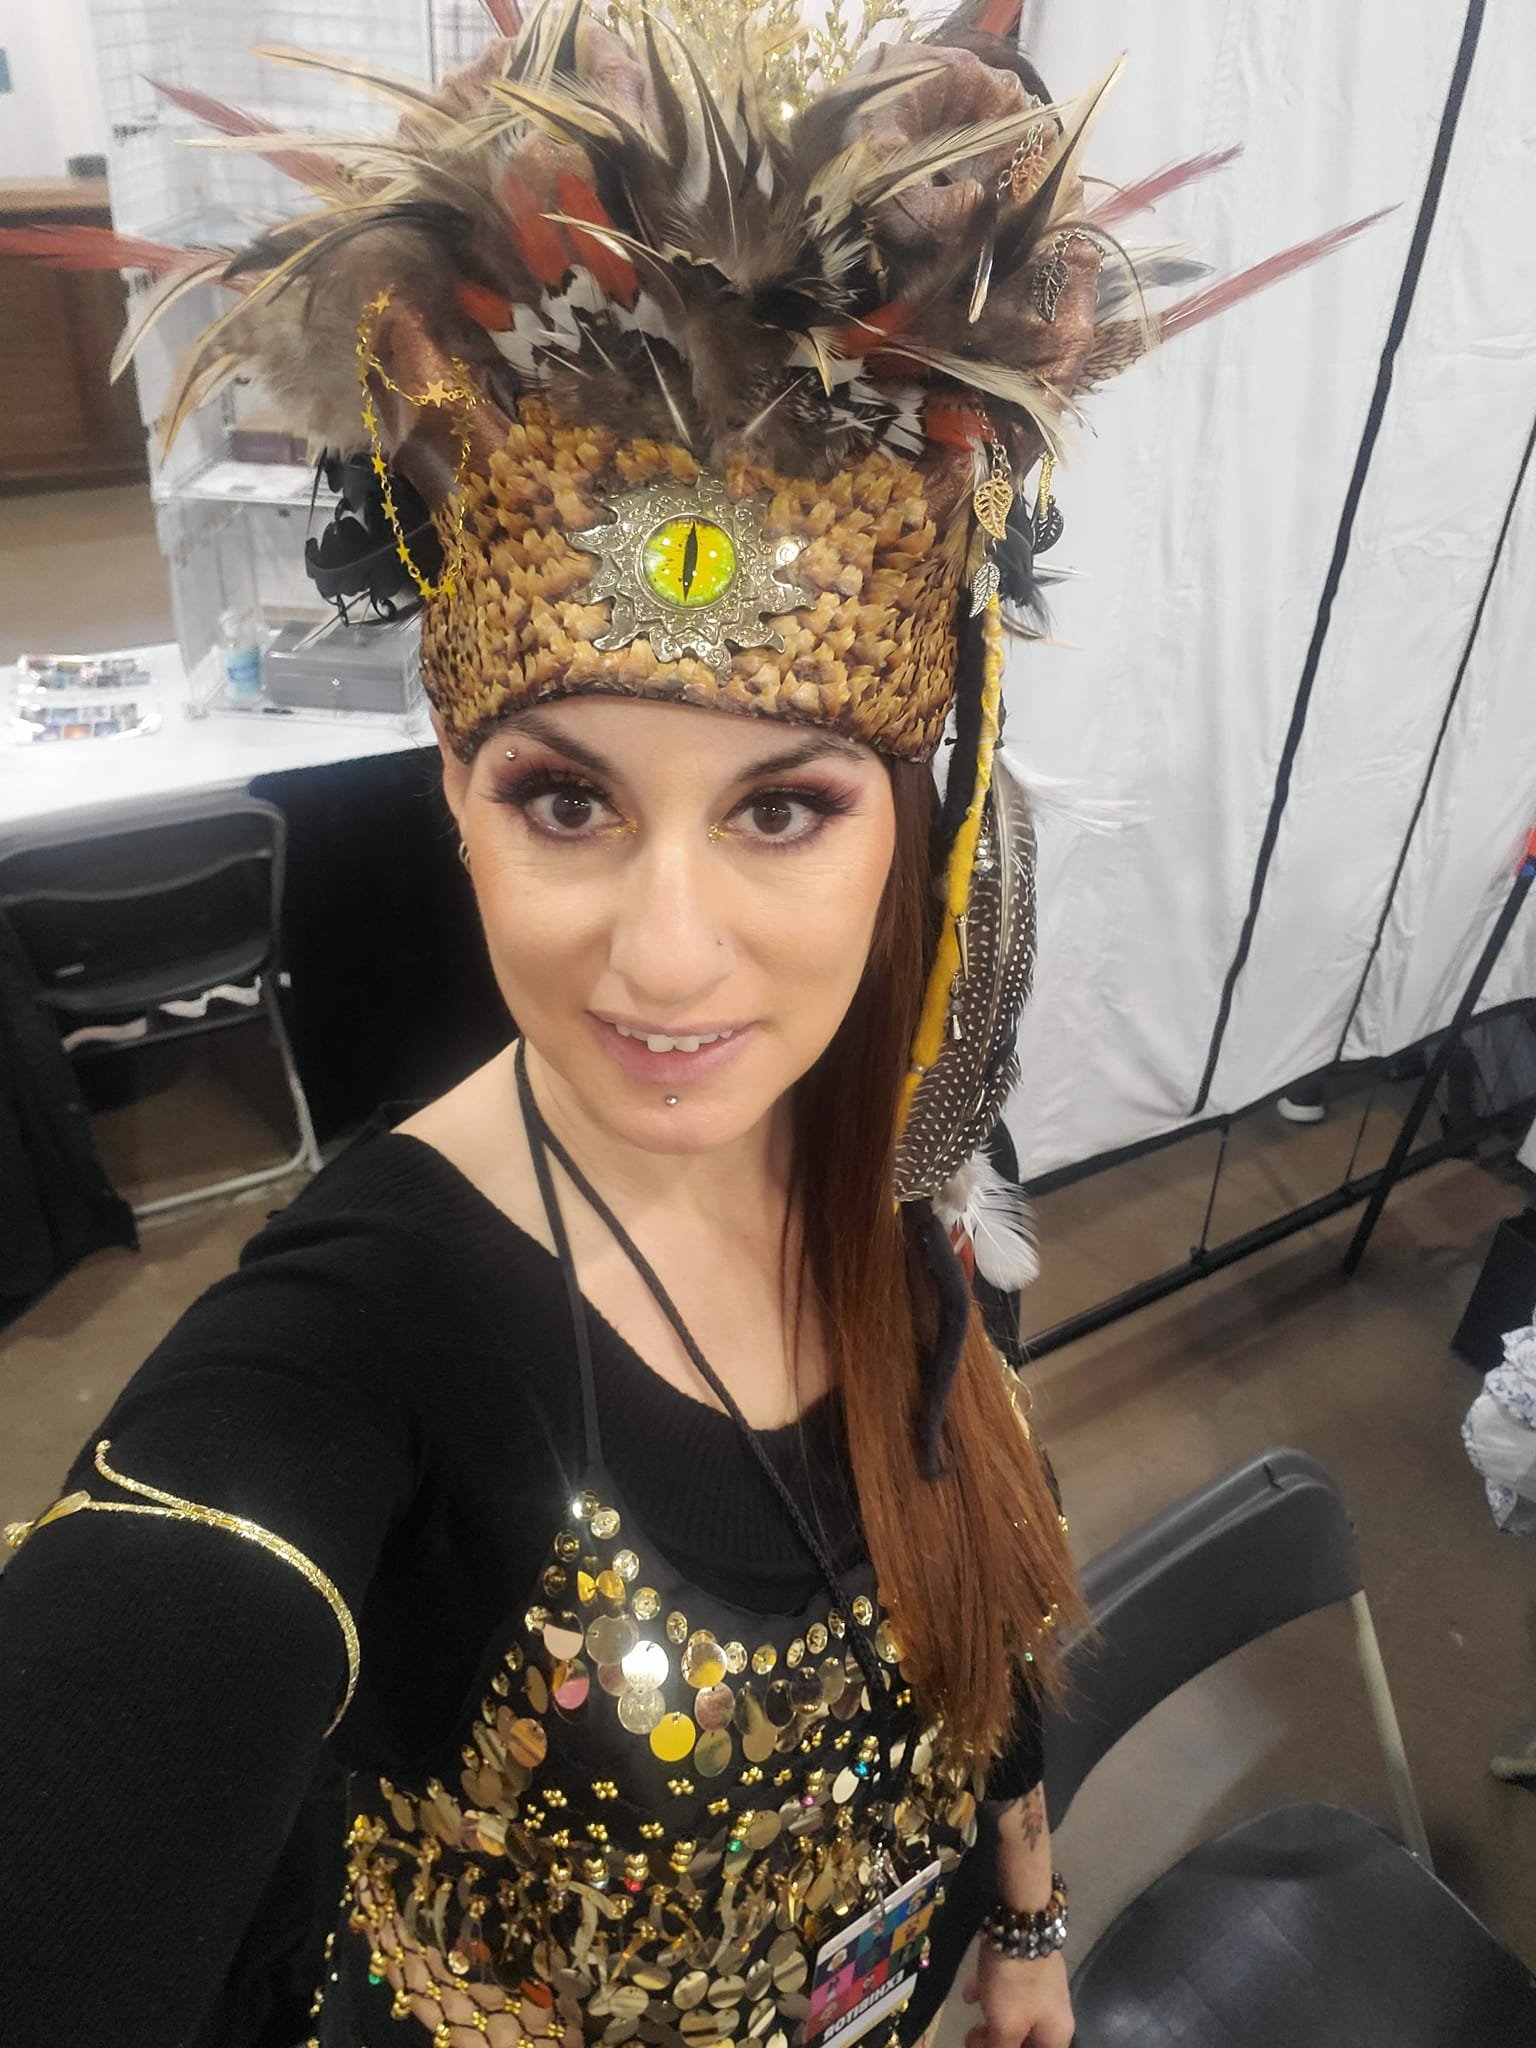 Feeling into my Dragon side today! Ready for Sauturday CALGARY EXPO 🐉✨️🐉Join us in the Arist Alley for some incredible art! 🎨
#dragonhead #headpiece #calgaryexpo #etherealbeauty #djkart1212